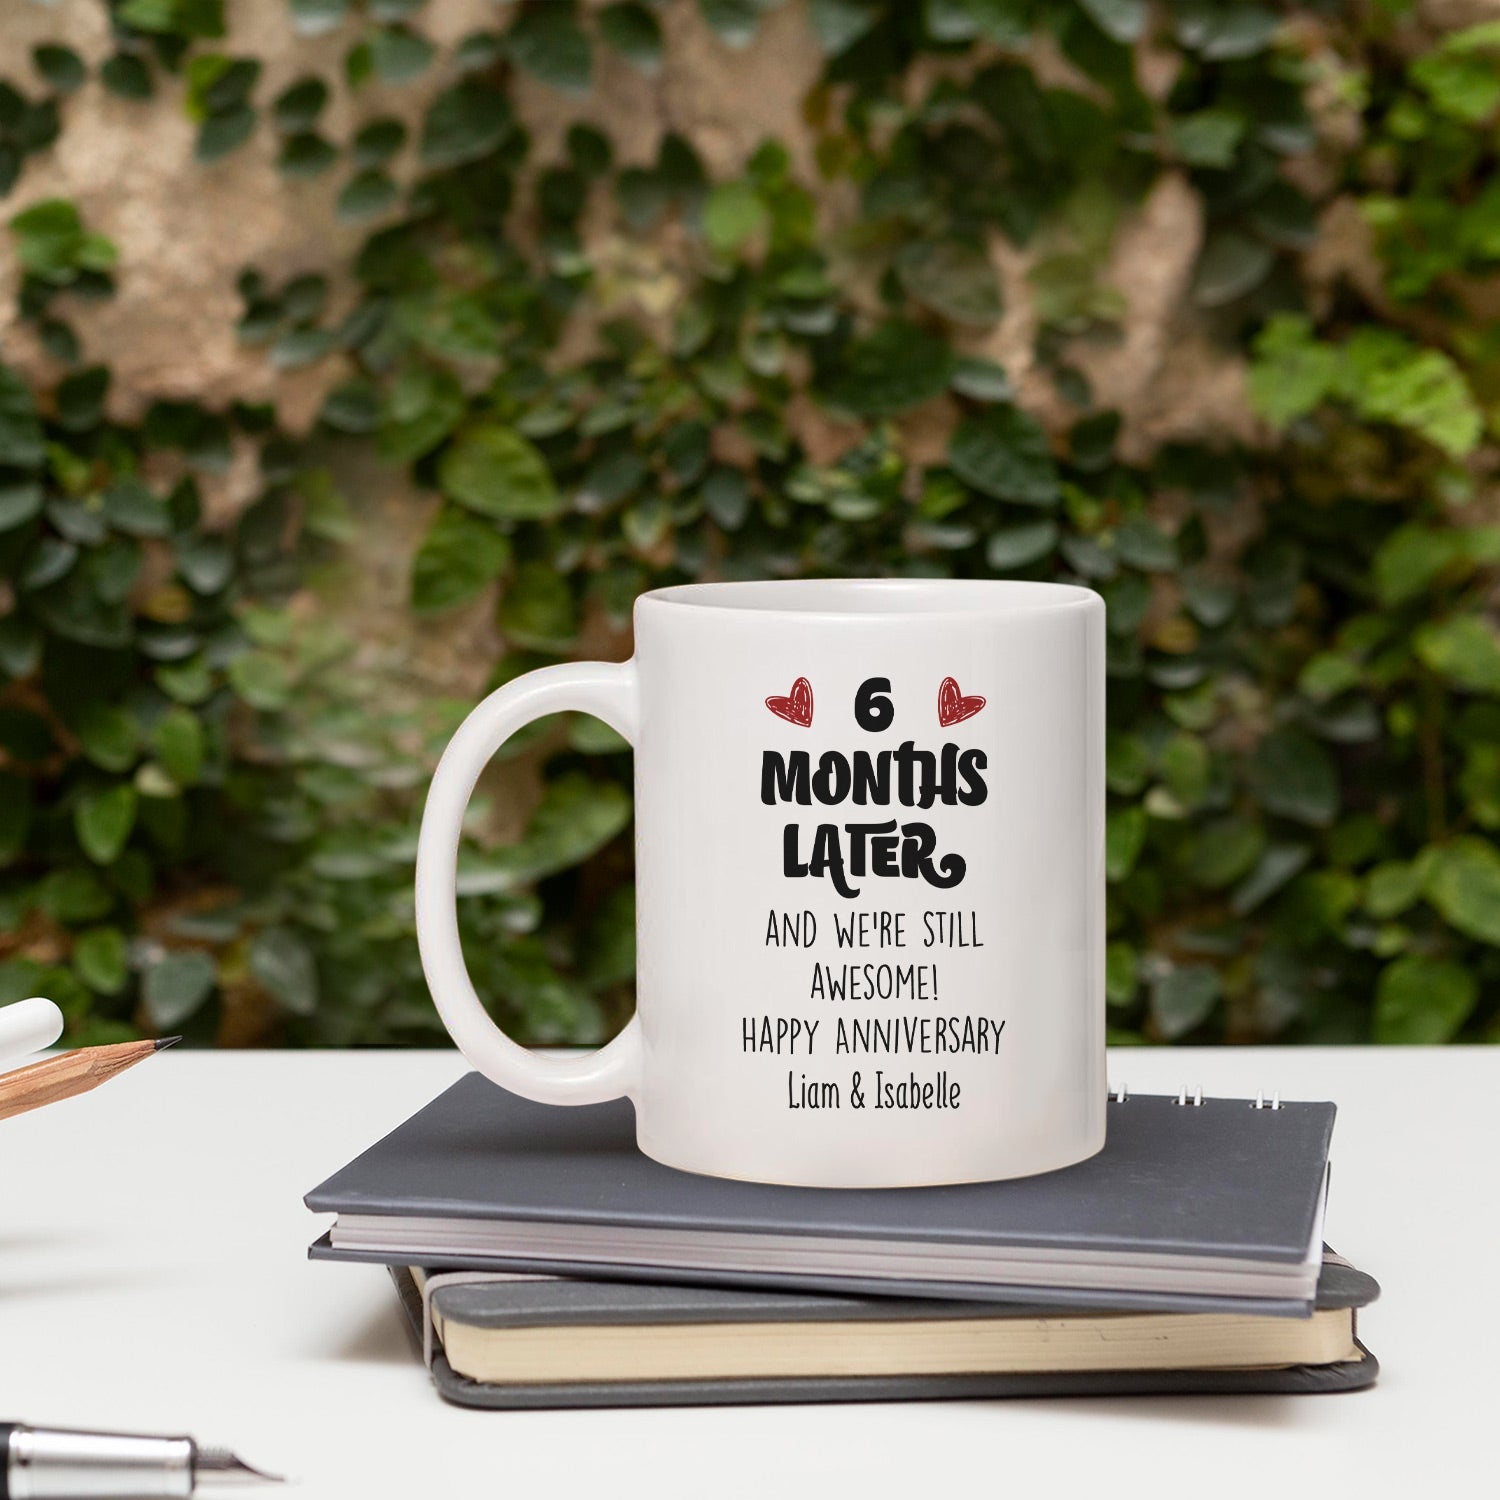 6 Months Later And We're Still Awesome - Personalized 6 Month Anniversary gift For Him or Her - Custom Mug - MyMindfulGifts